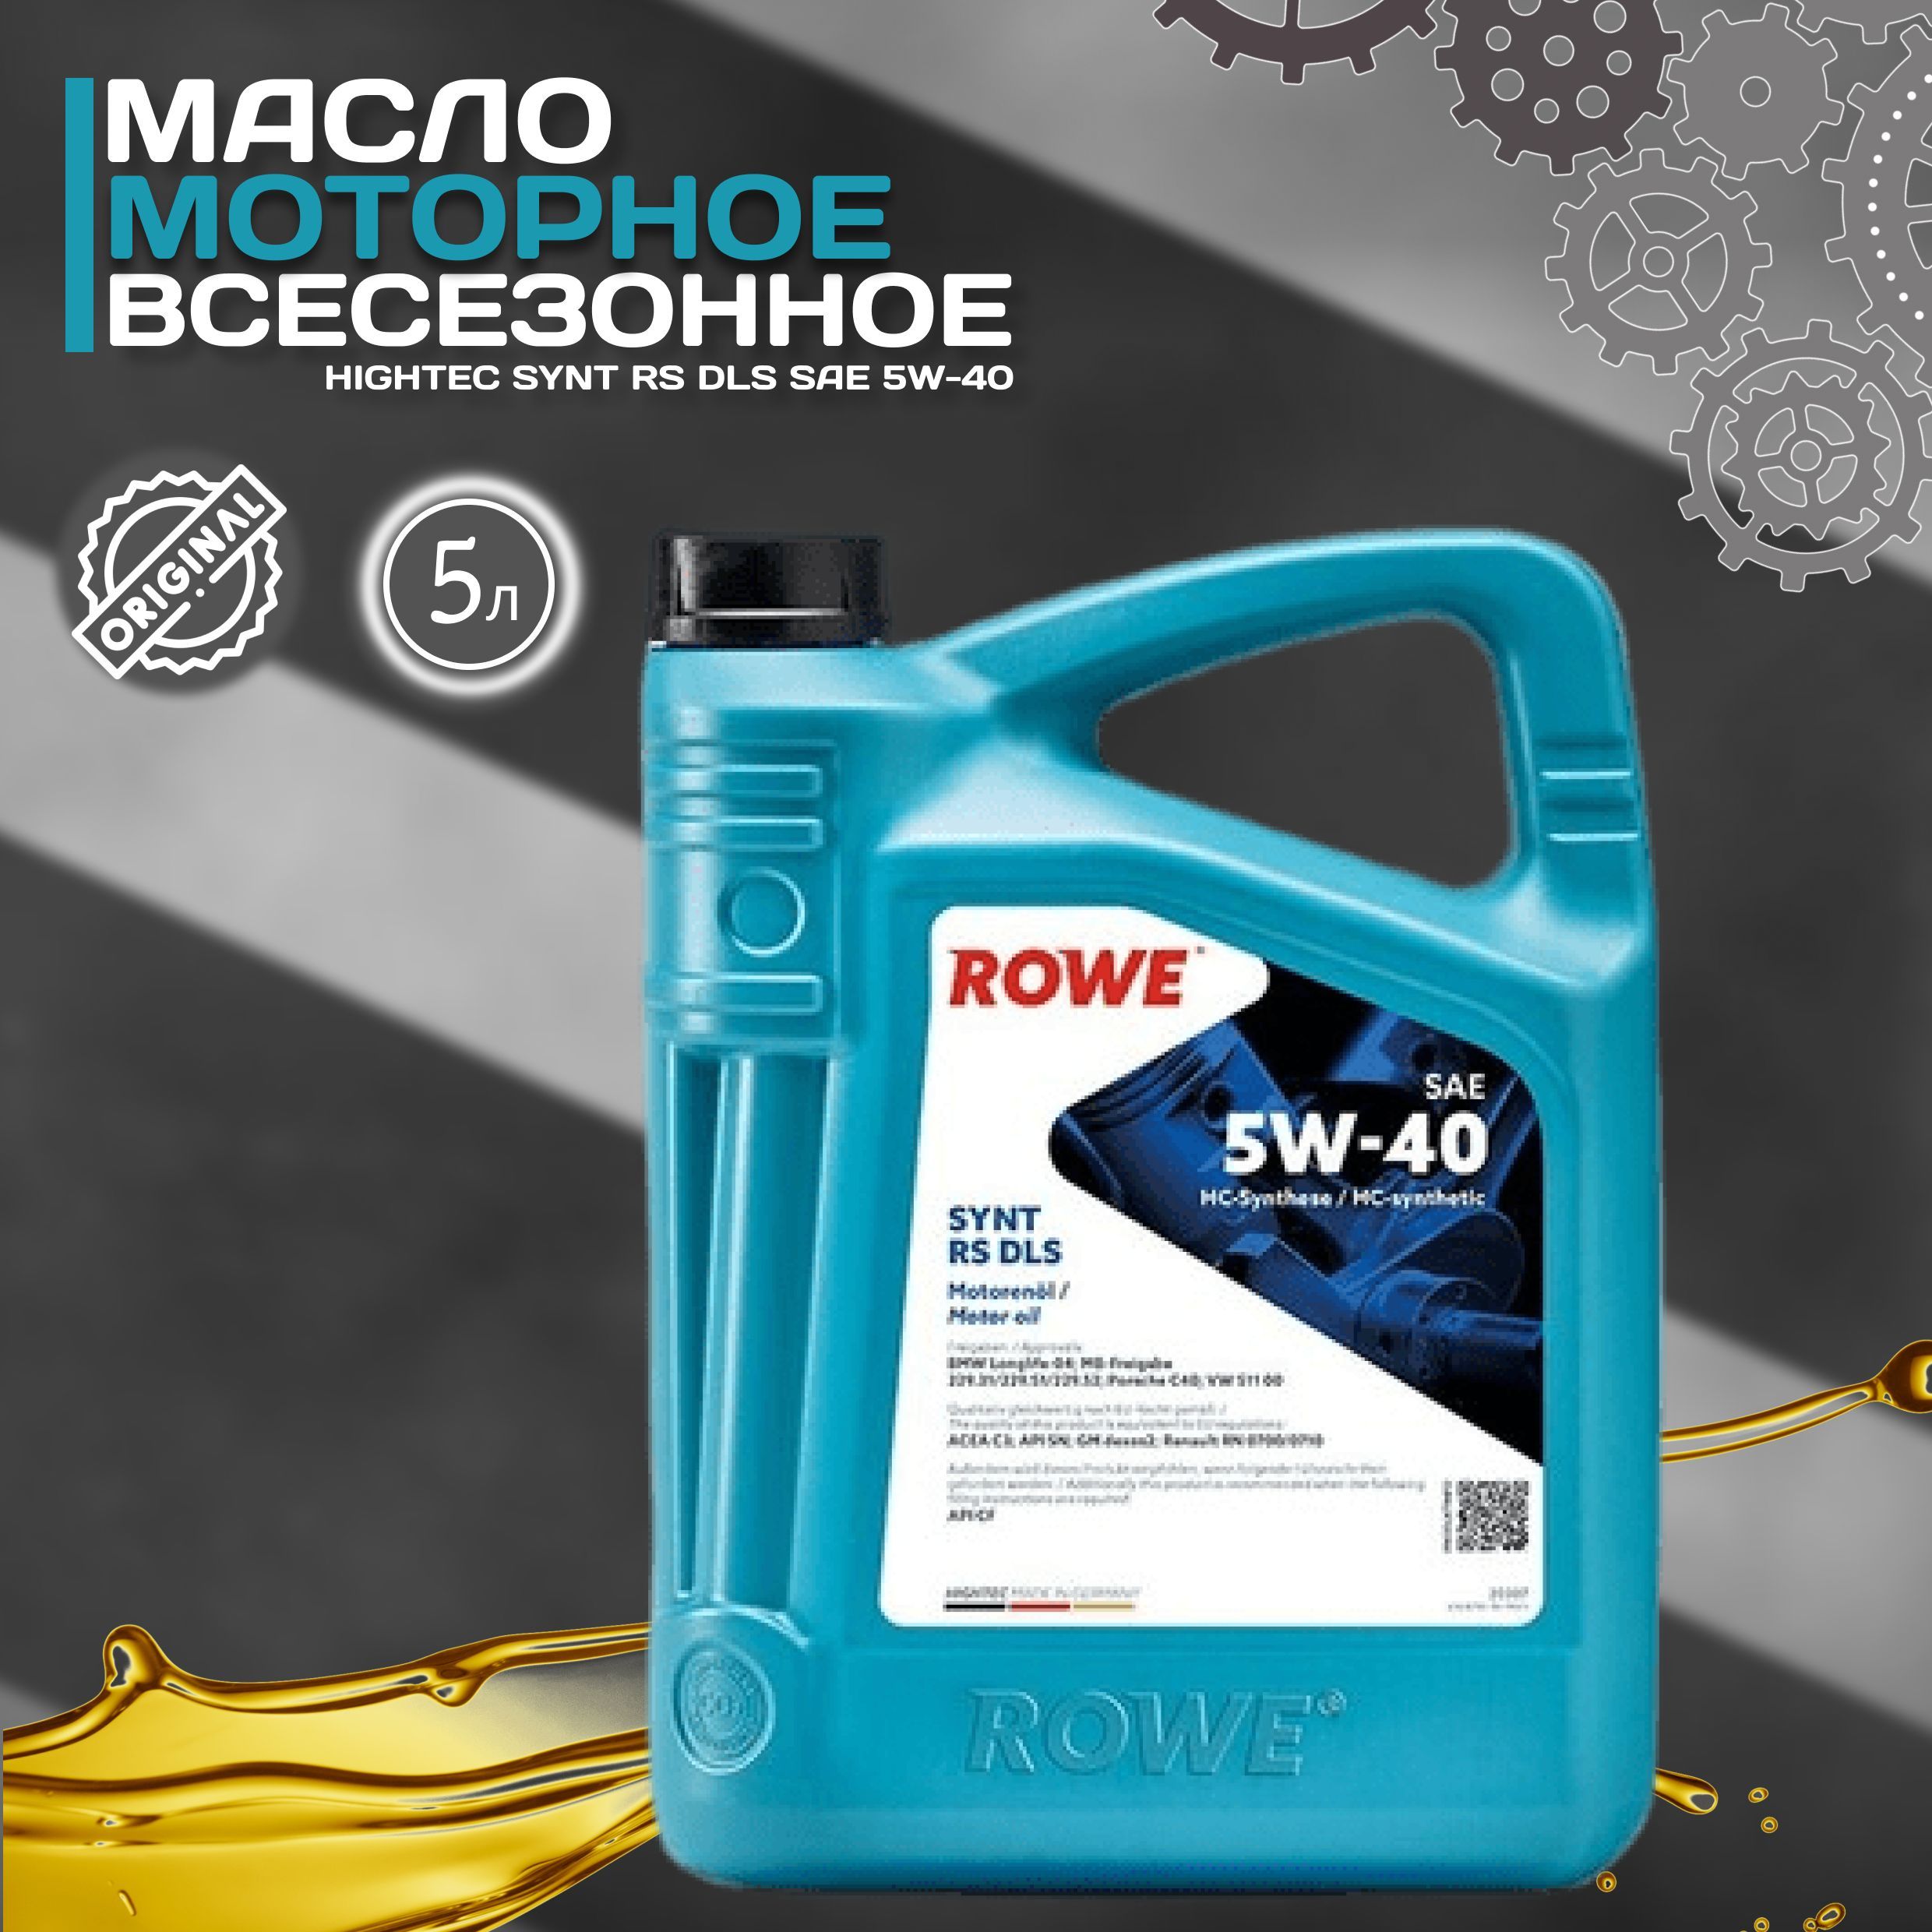 Rowe 5w40. Rowe Hightec Synt RS DLS. Rowe 5w40 Hightec Synt RC HC-D. Rowe 5w40 504 507. Моторное масло rowe 5w 40